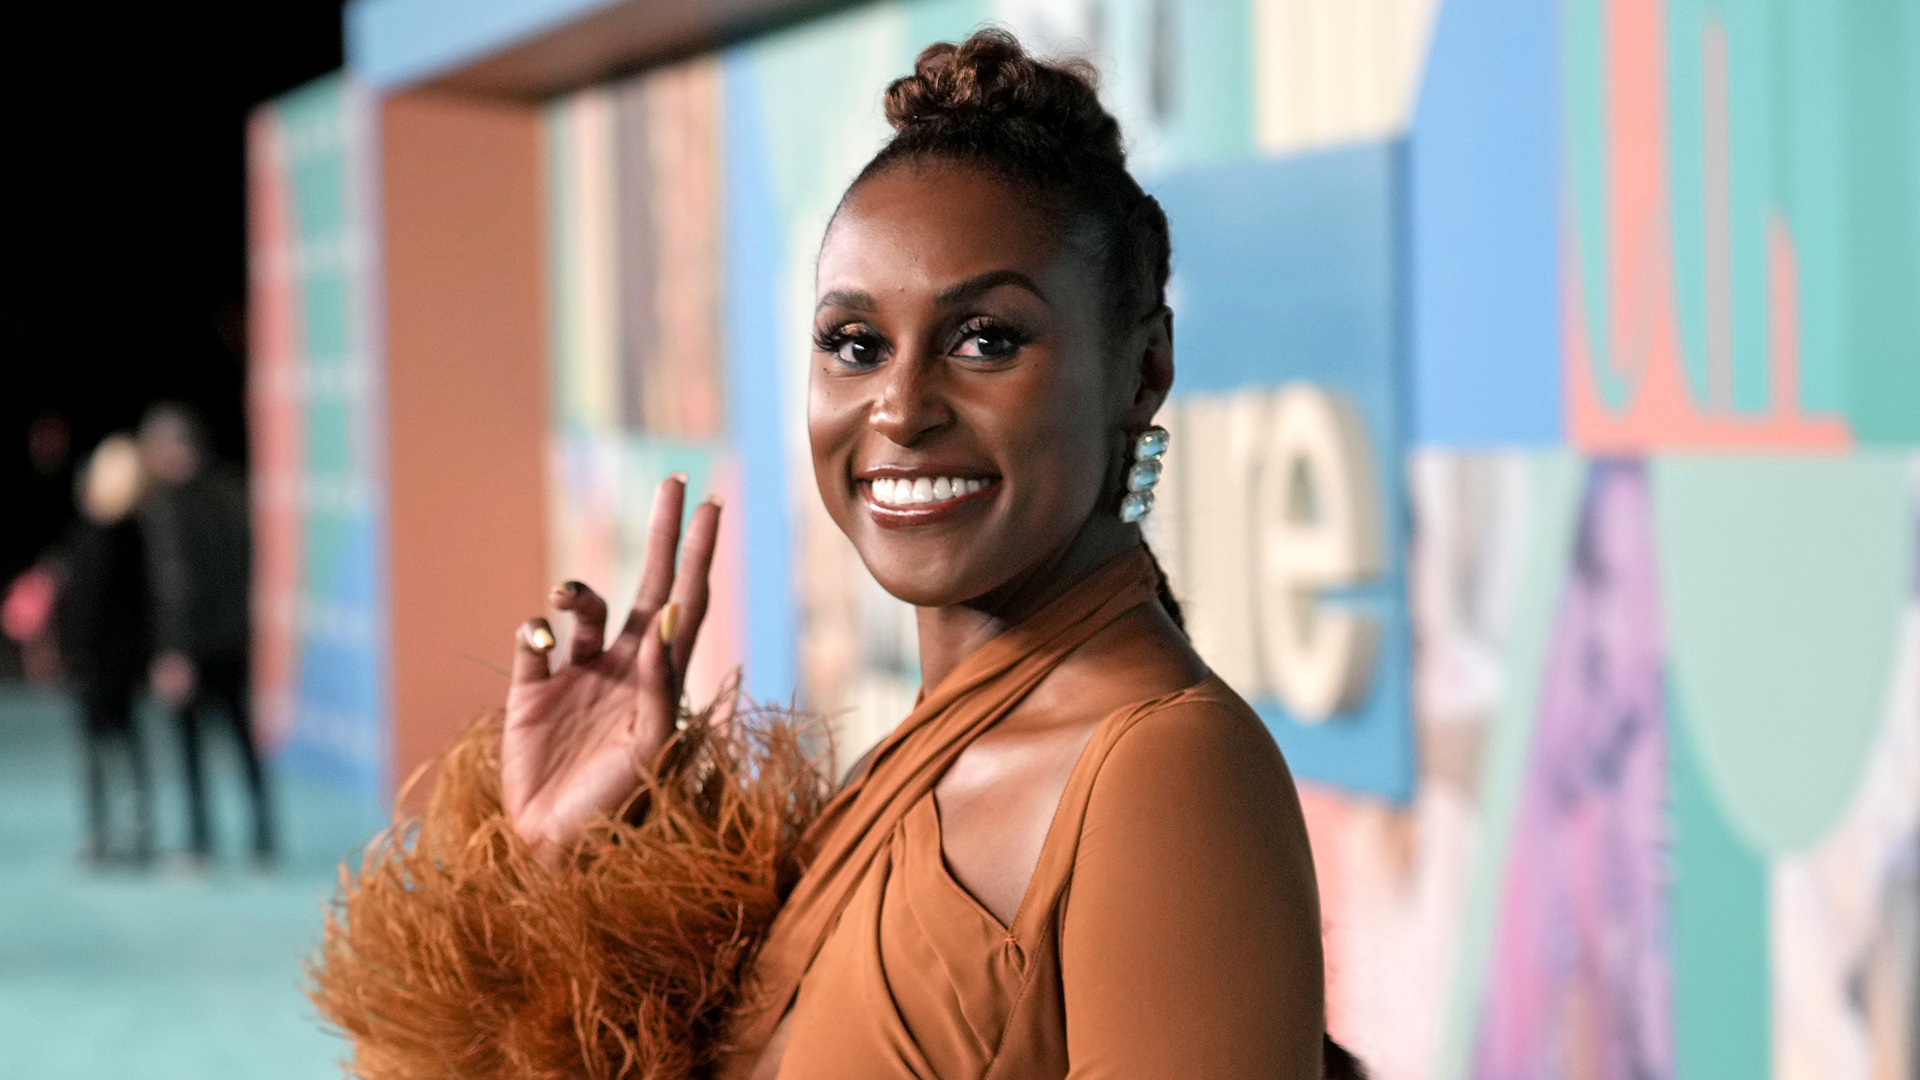 Exclusive: Issa Rae Joins Forces With American Express To Champion Black-Owned Businesses